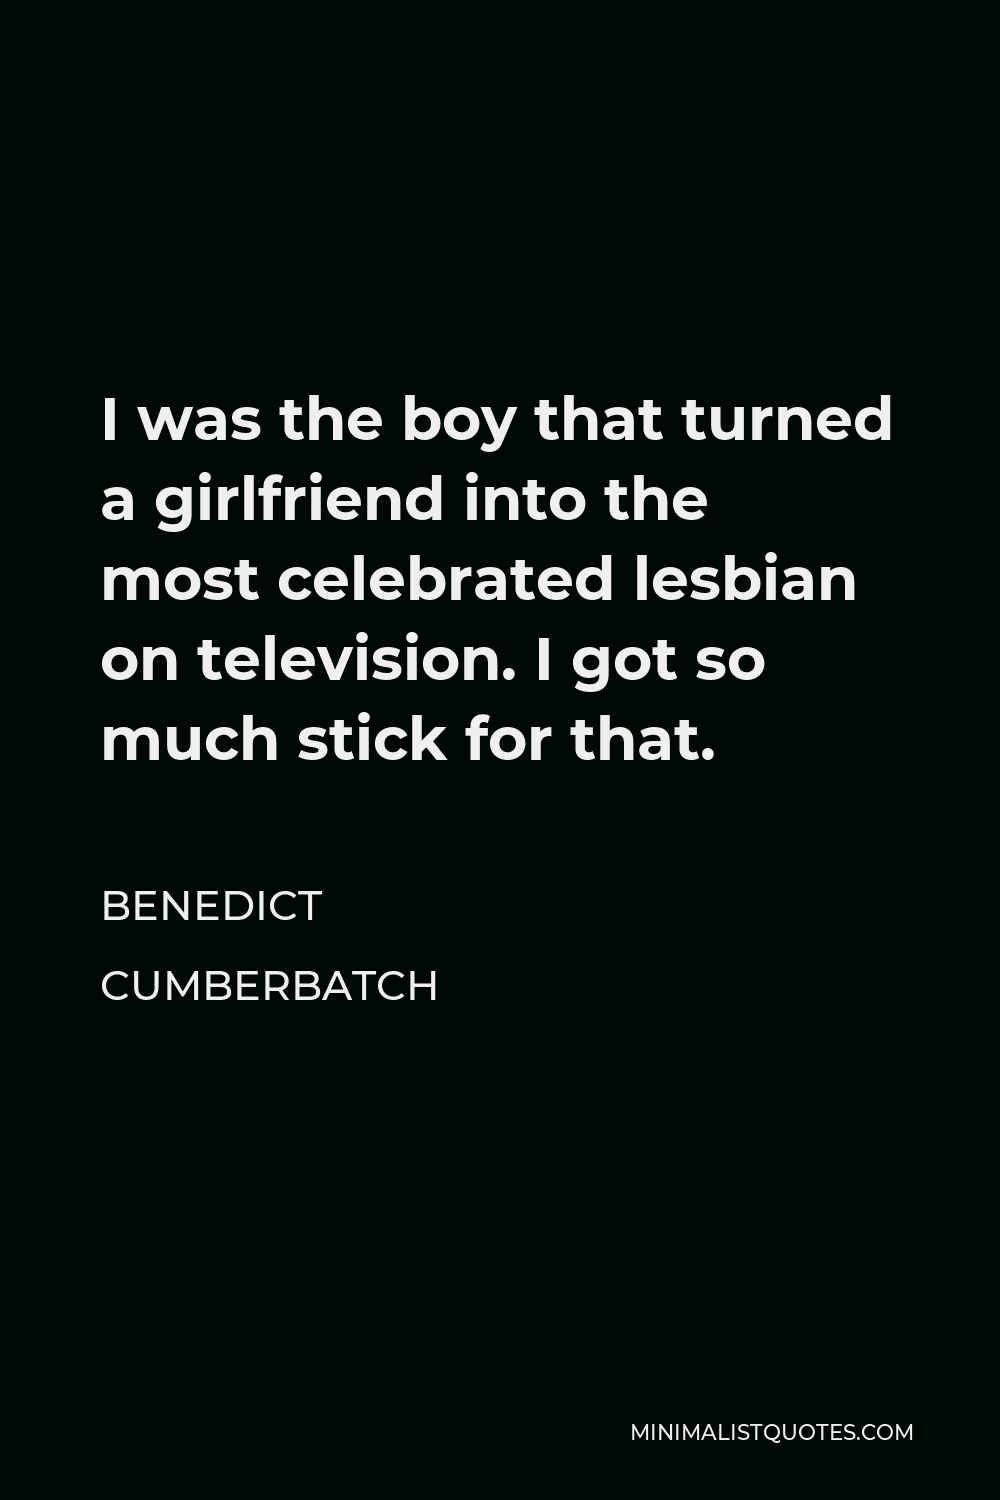 Benedict Cumberbatch Quote - I was the boy that turned a girlfriend into the most celebrated lesbian on television. I got so much stick for that.